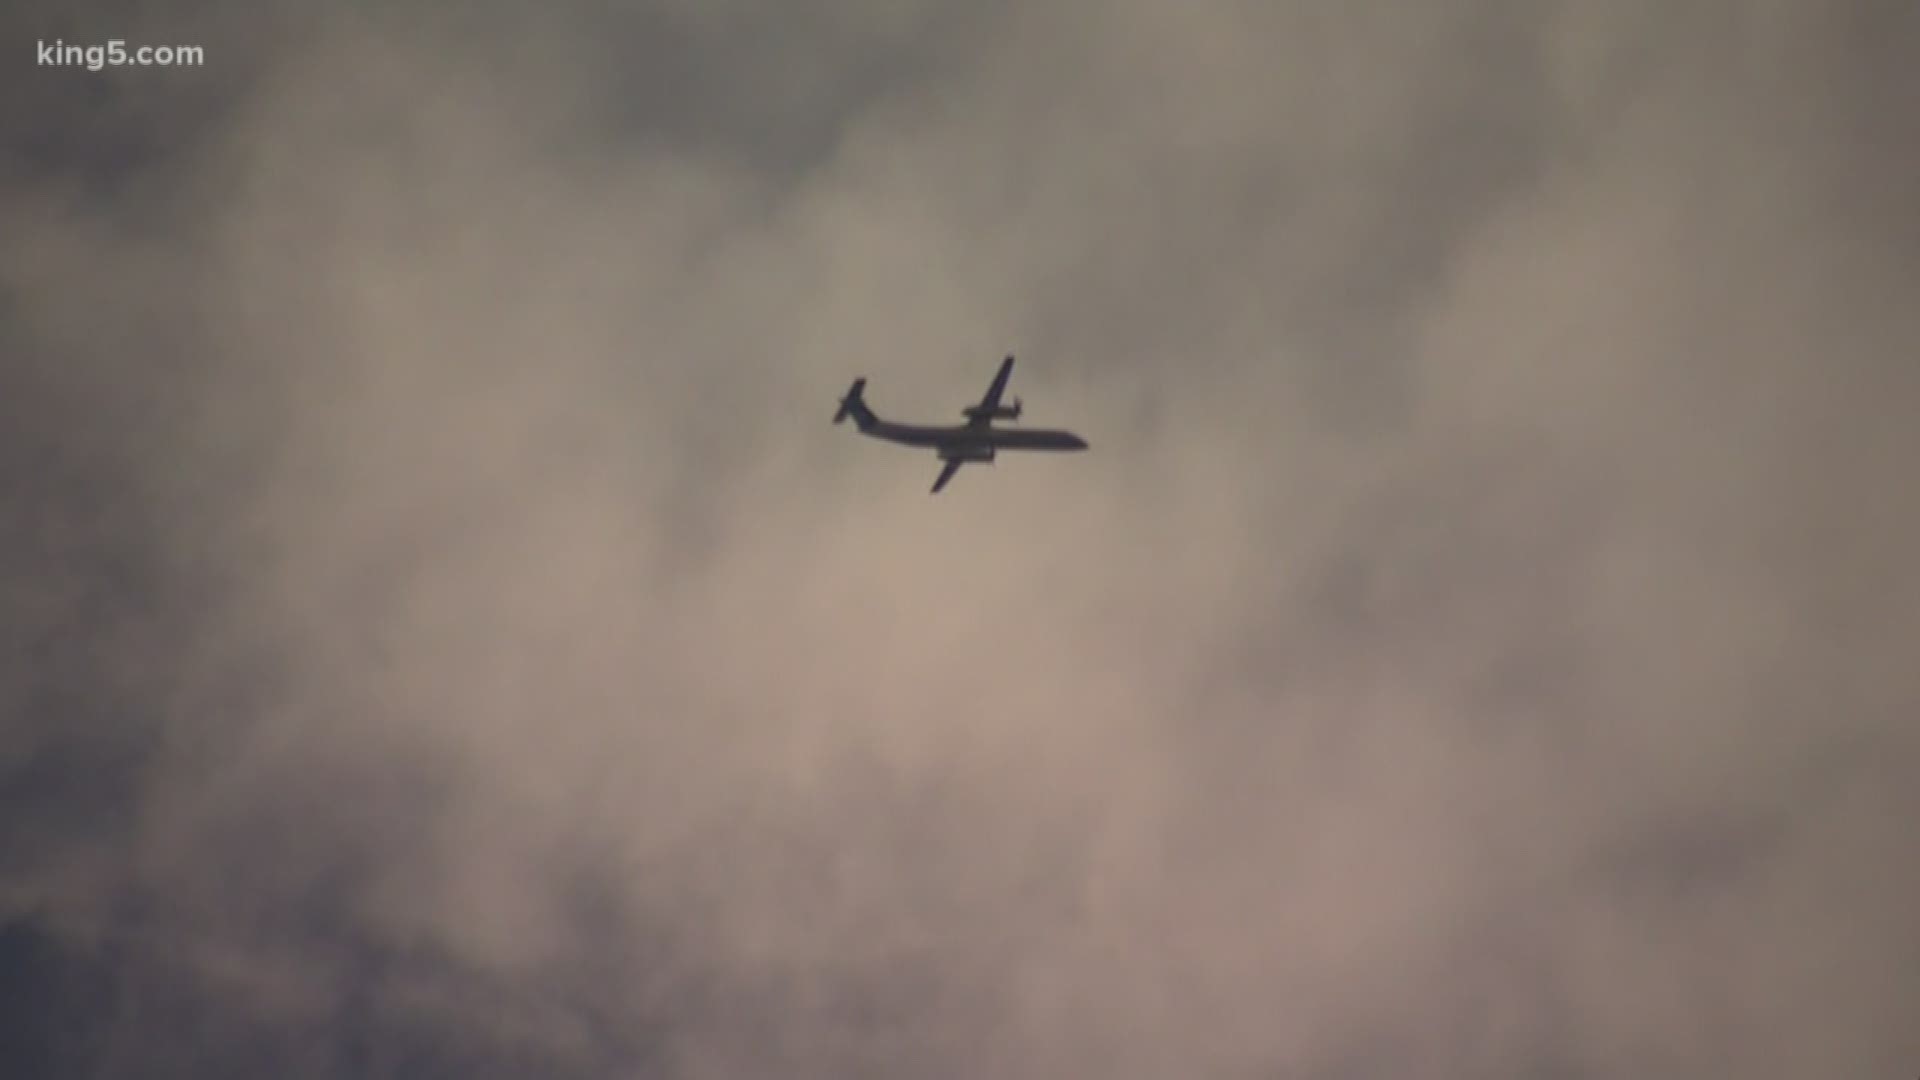 The City of Burien has won a victory in its lawsuit against the FAA regarding a flight pattern city officials say puts 60-70 planes overhead per day.